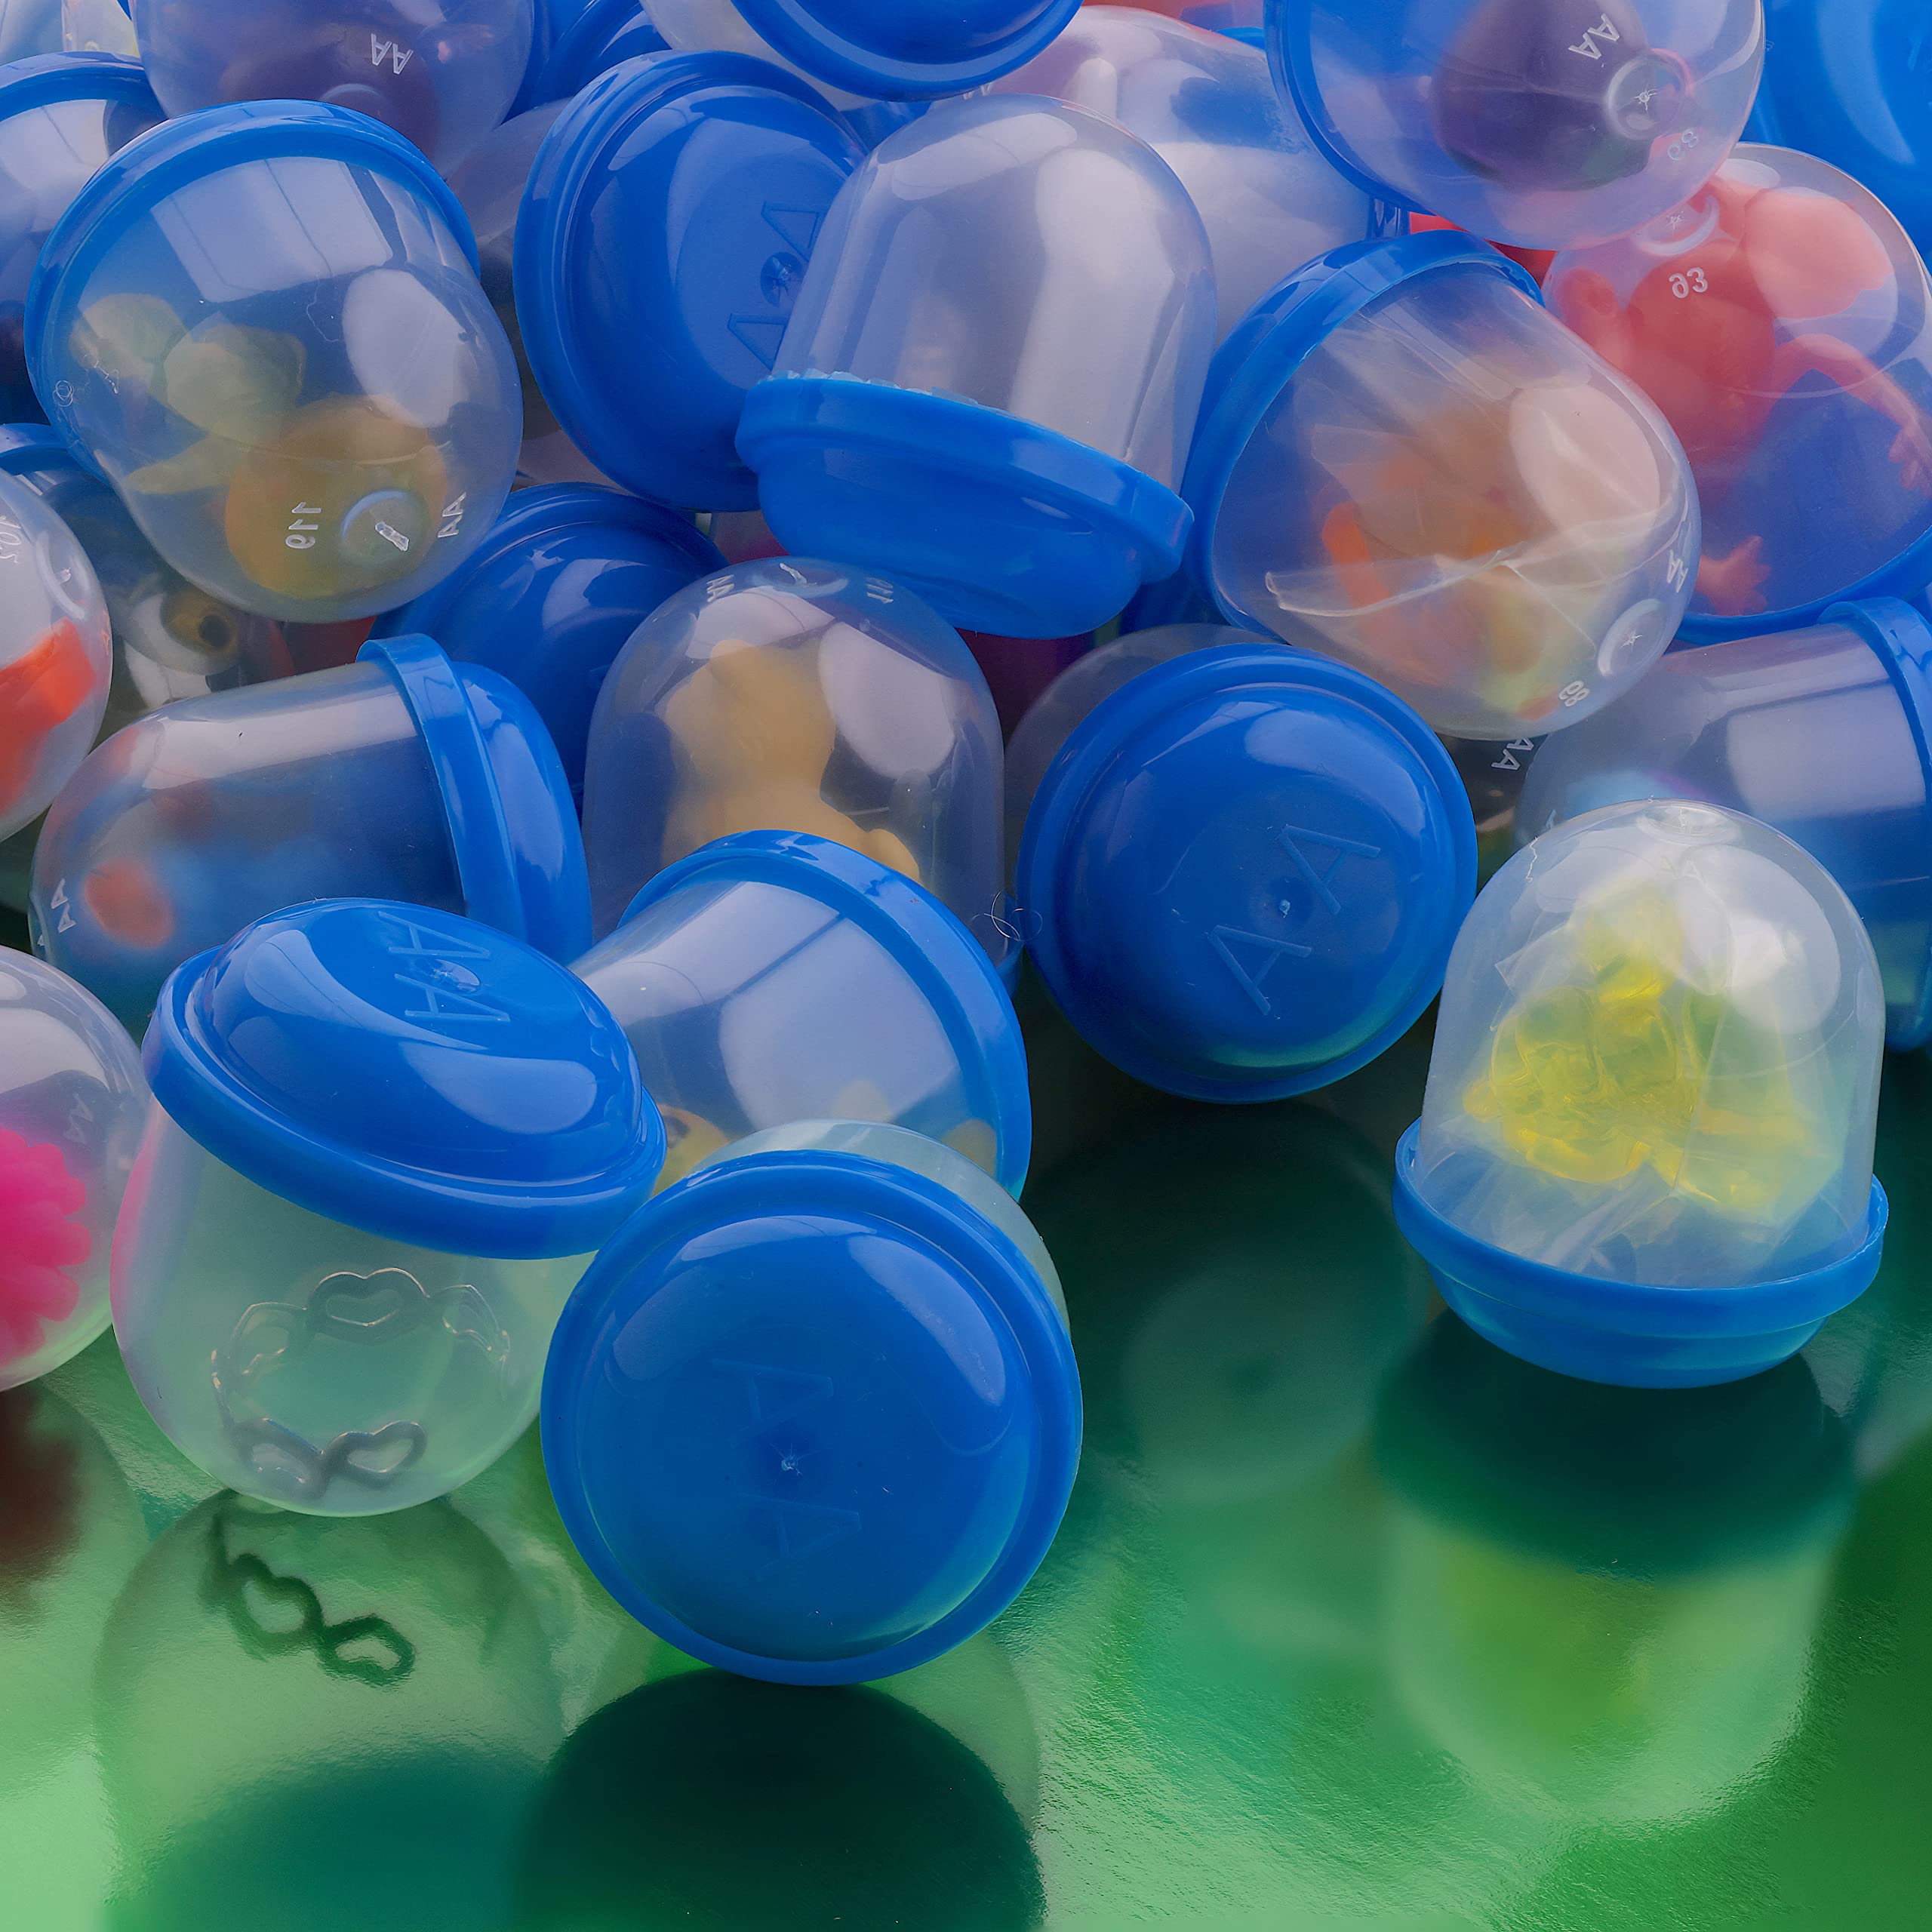 Vending Machine Capsules - 1.1 Inch Tiny Frosty Clear-Colored Acorn Capsules - 30 Pcs Empty Toy Capsules - Plastic Capsules for Toys - 28 mm Prize Machine Capsules - Small Colored Containers